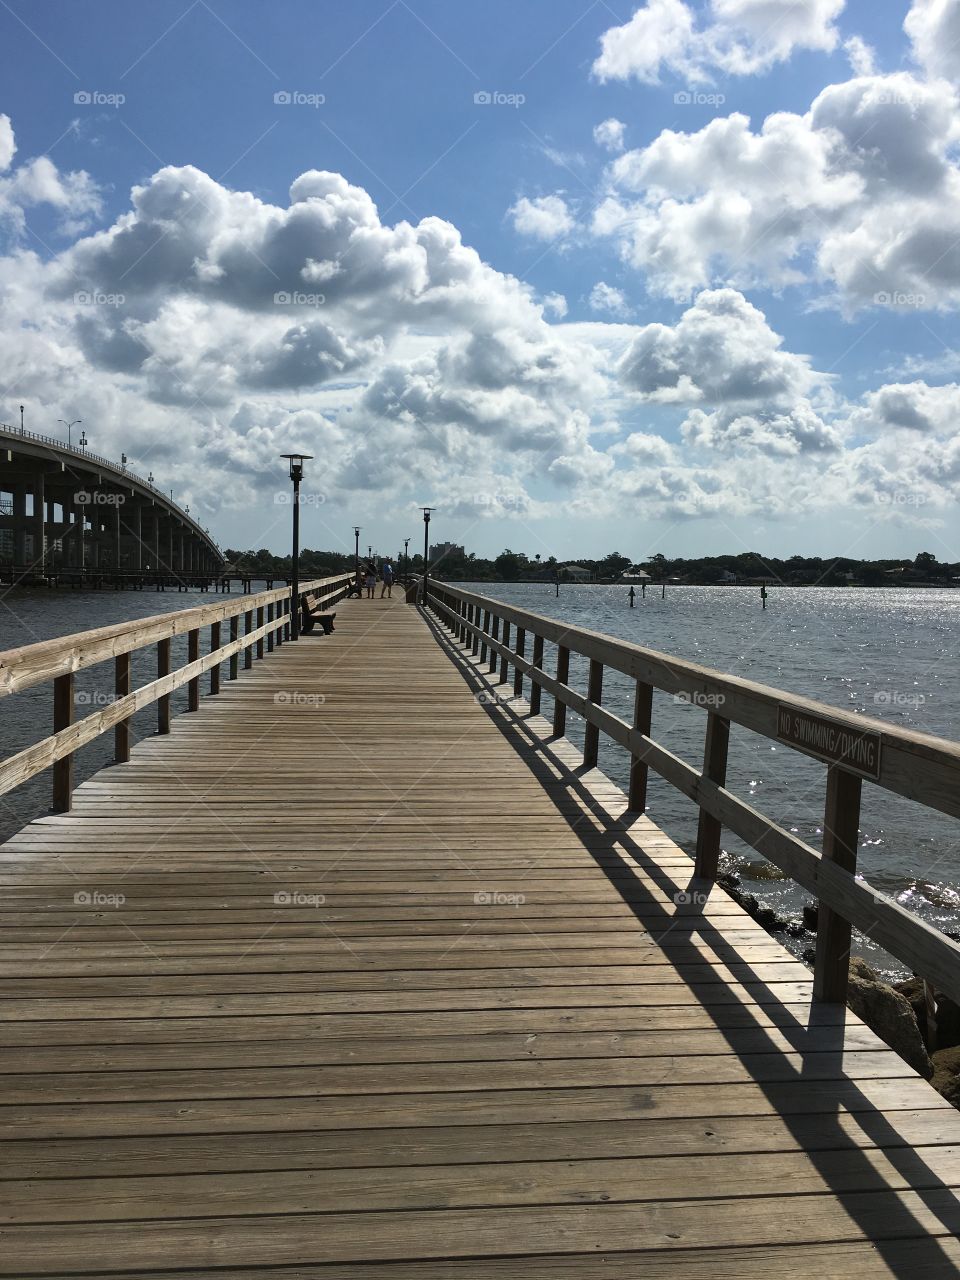 Pier on the river